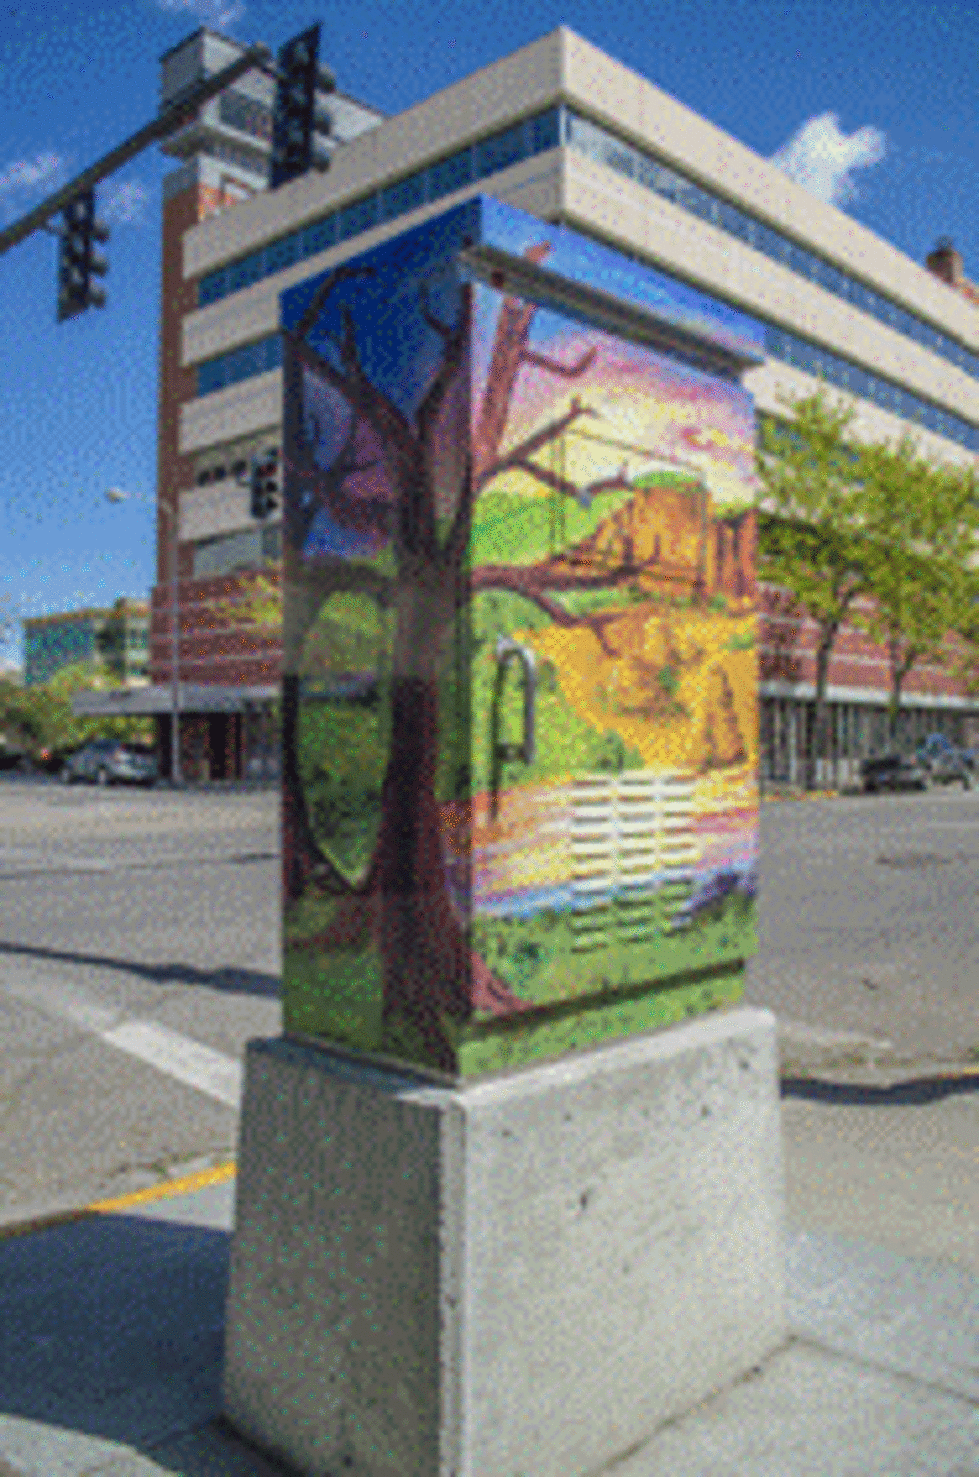 Calling All Artists to Decorate Billings Traffic Signal Boxes